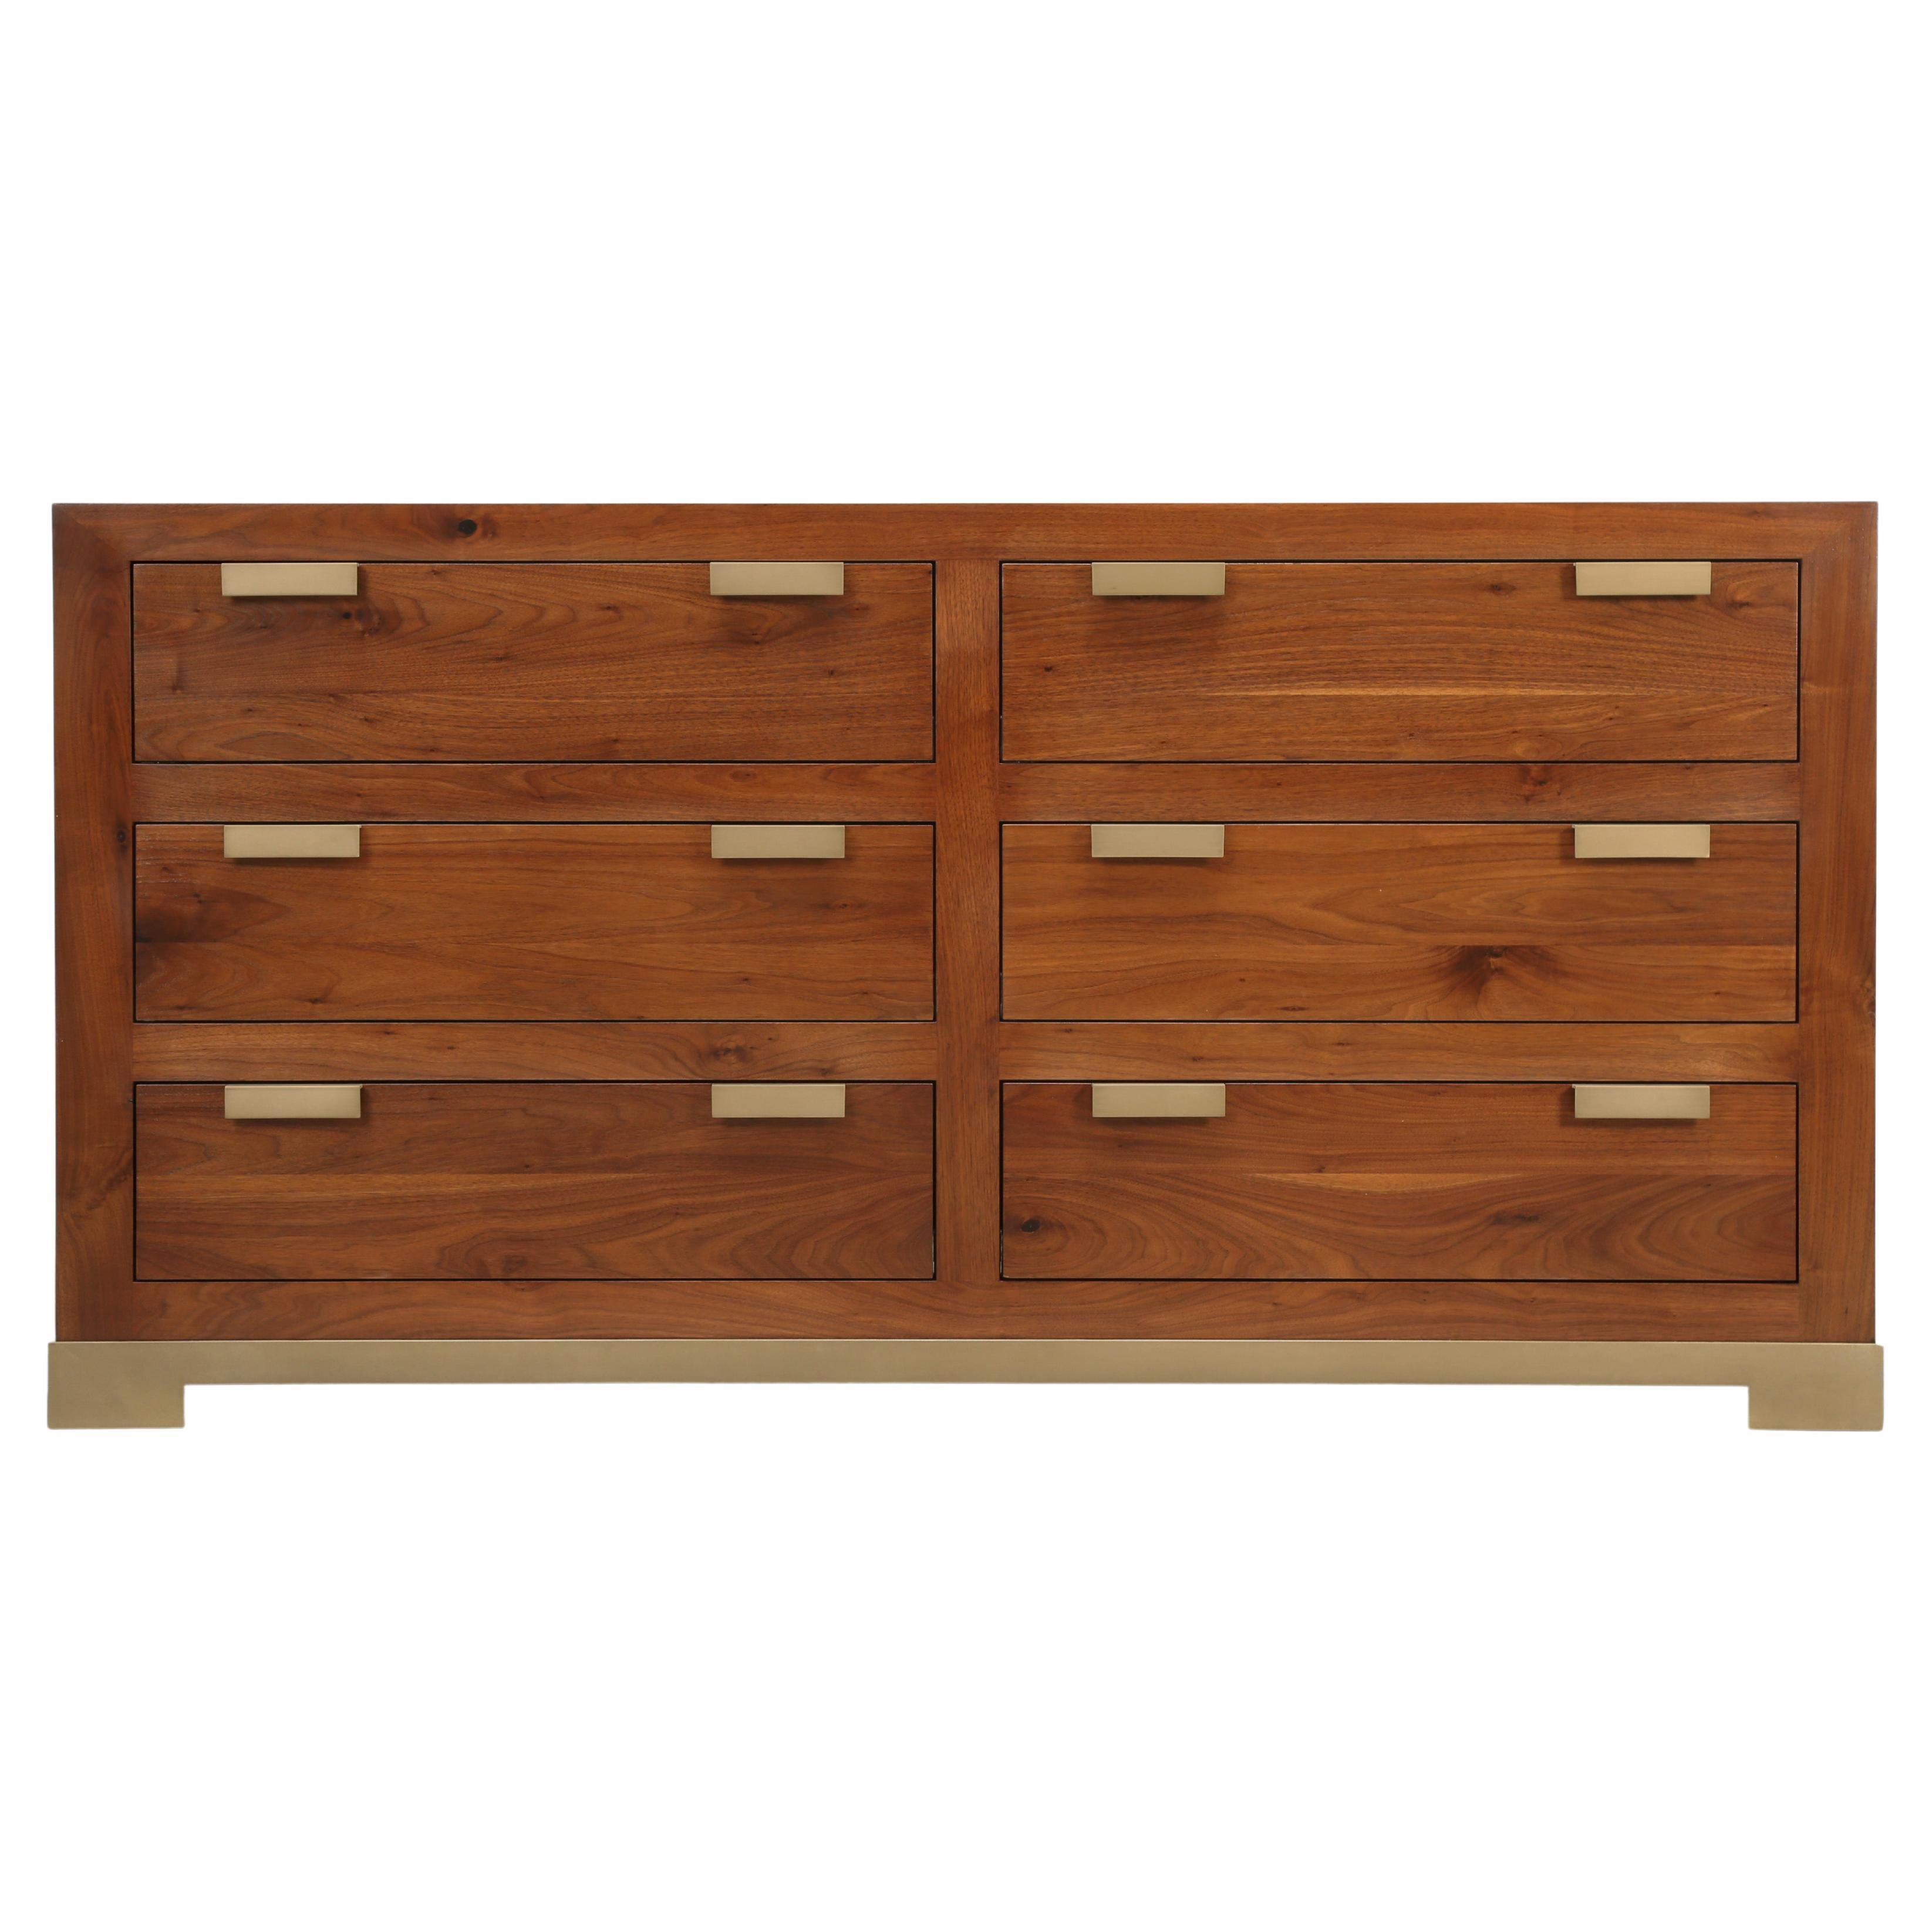 Solid Walnut Dresser or Chest of Drawers Made to Order, Any Dimension or Finish For Sale